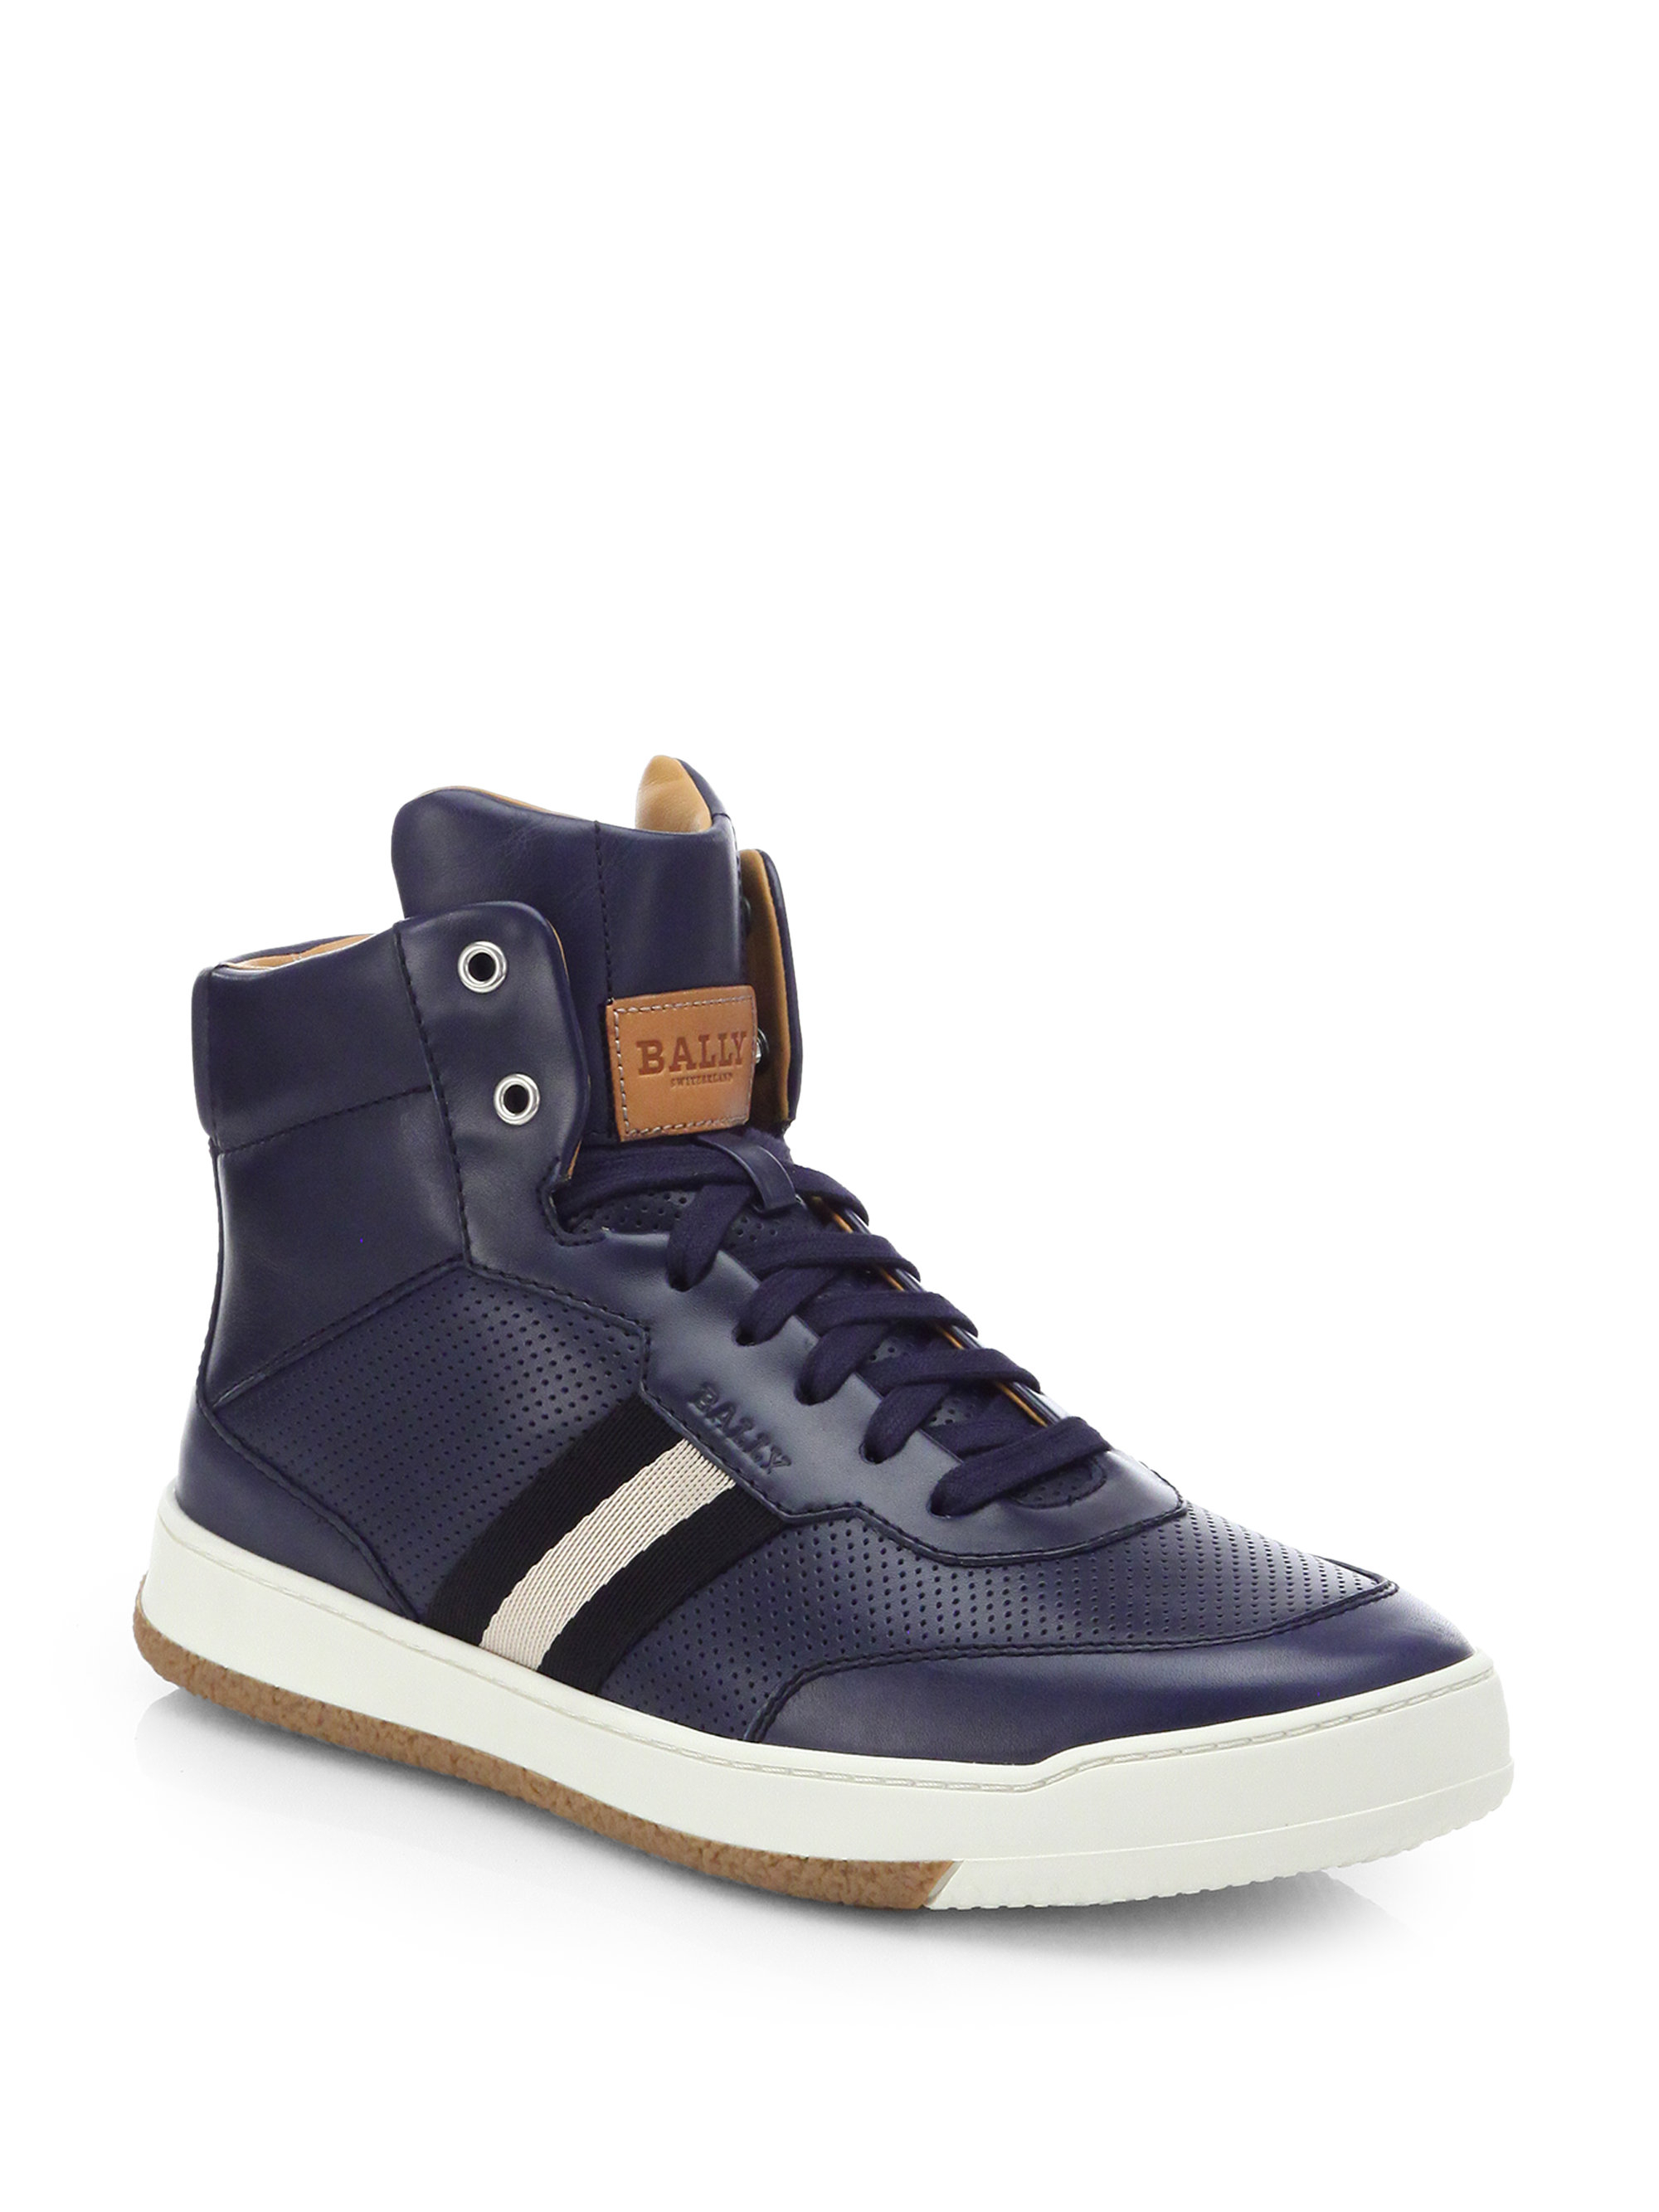 Bally Perforated Leather Hightop Sneakers in Blue for Men | Lyst